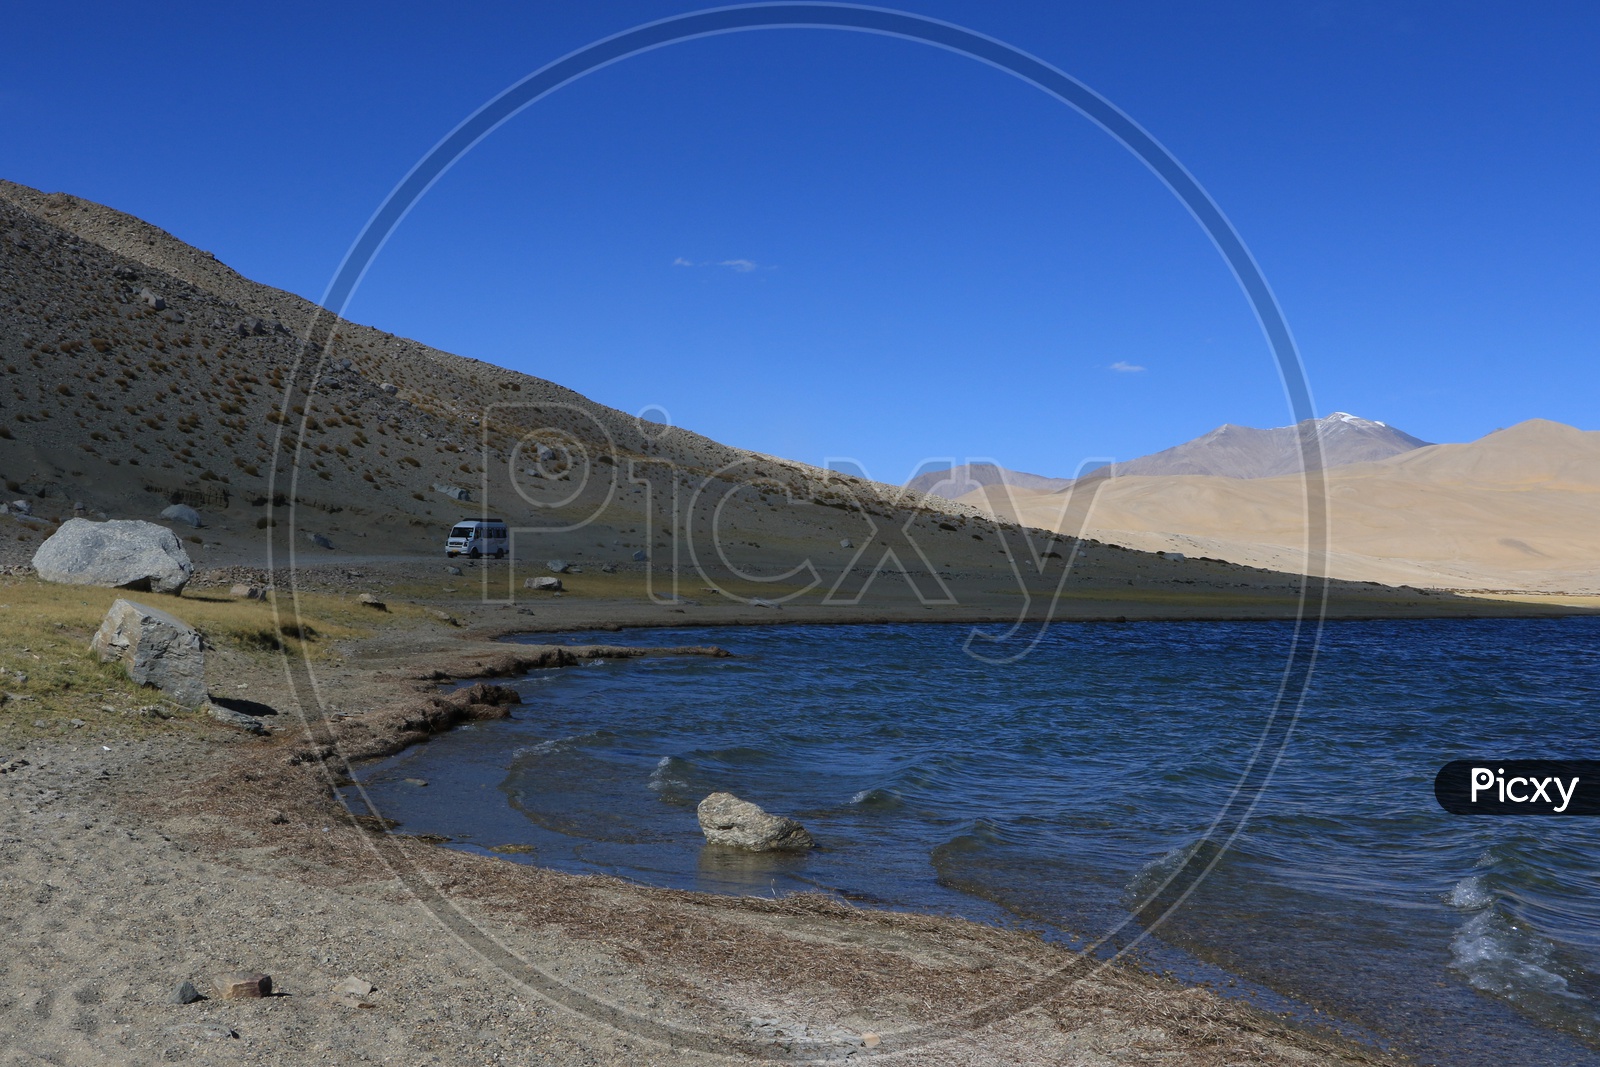 Landscapes of Leh - Mountains & Lake/Blue waters